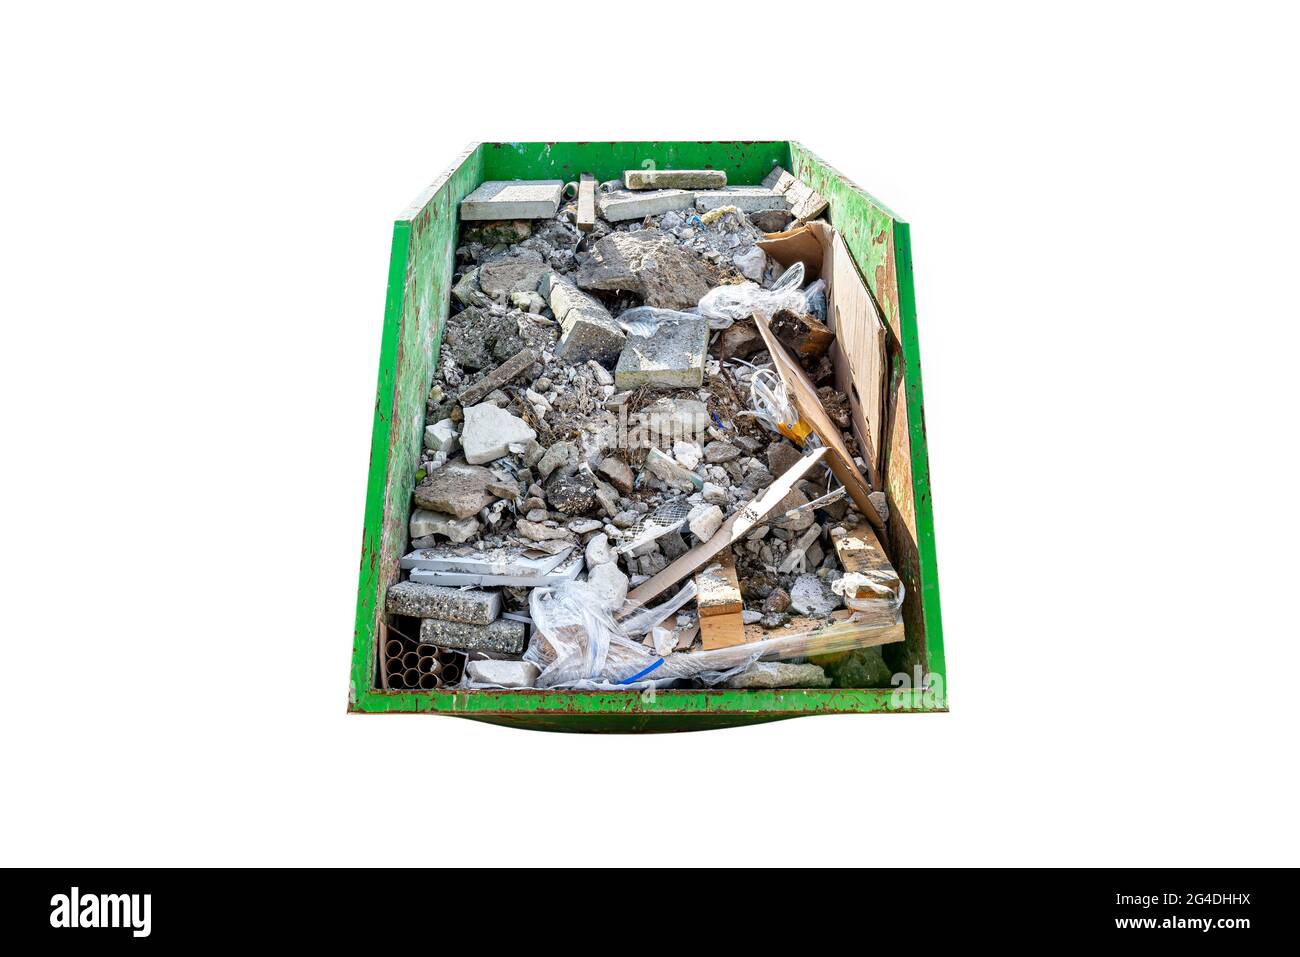 Large metal green container filled with rubble and construction waste, isolated on white background with a clipping path. Stock Photo